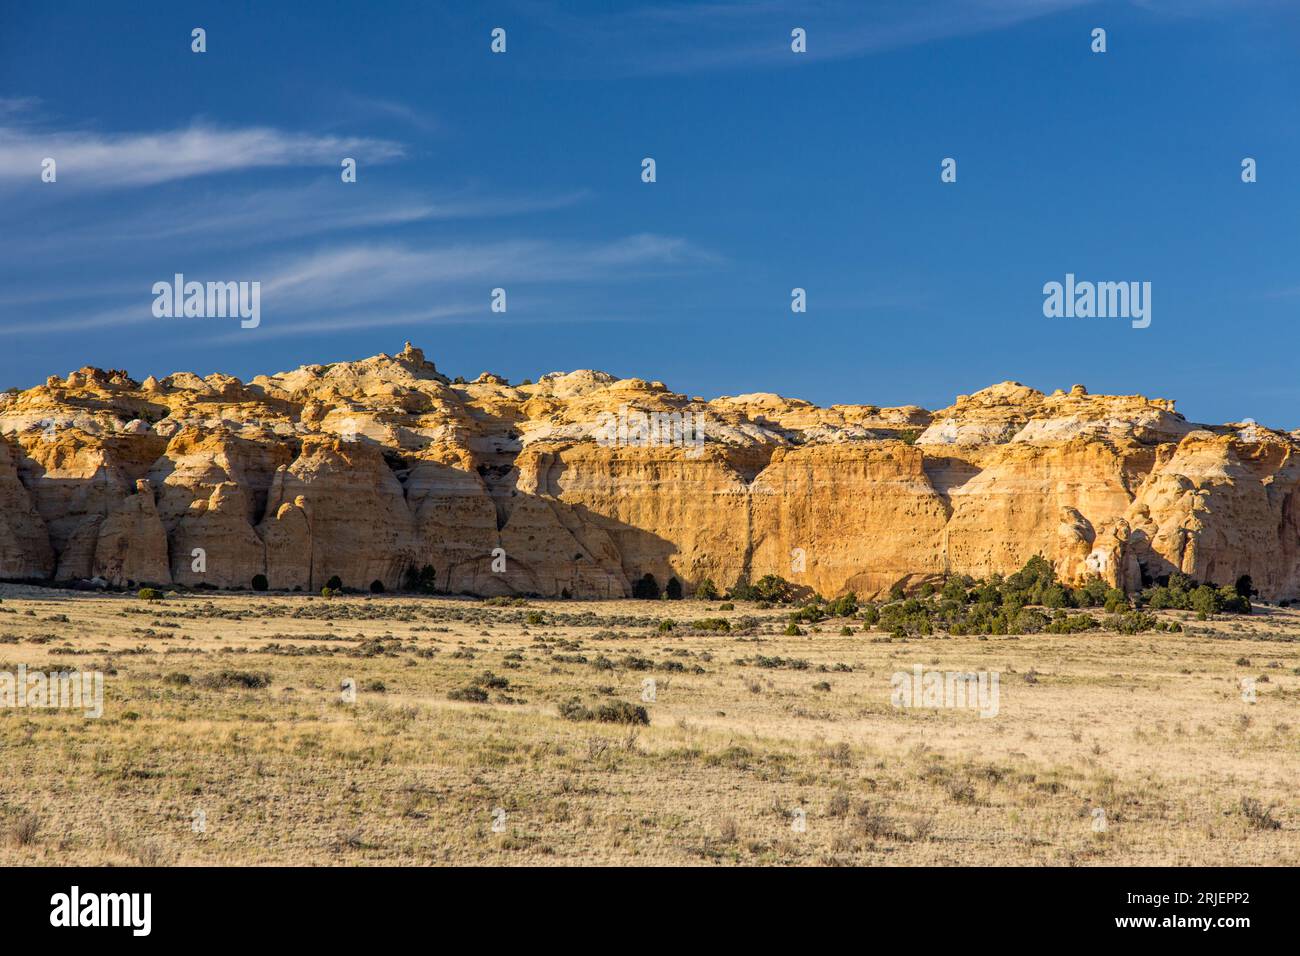 Colorful sculpted Navajo Sandstone formations in the Head of Sinbad area of the San Rafael Swell in Utah. Stock Photo